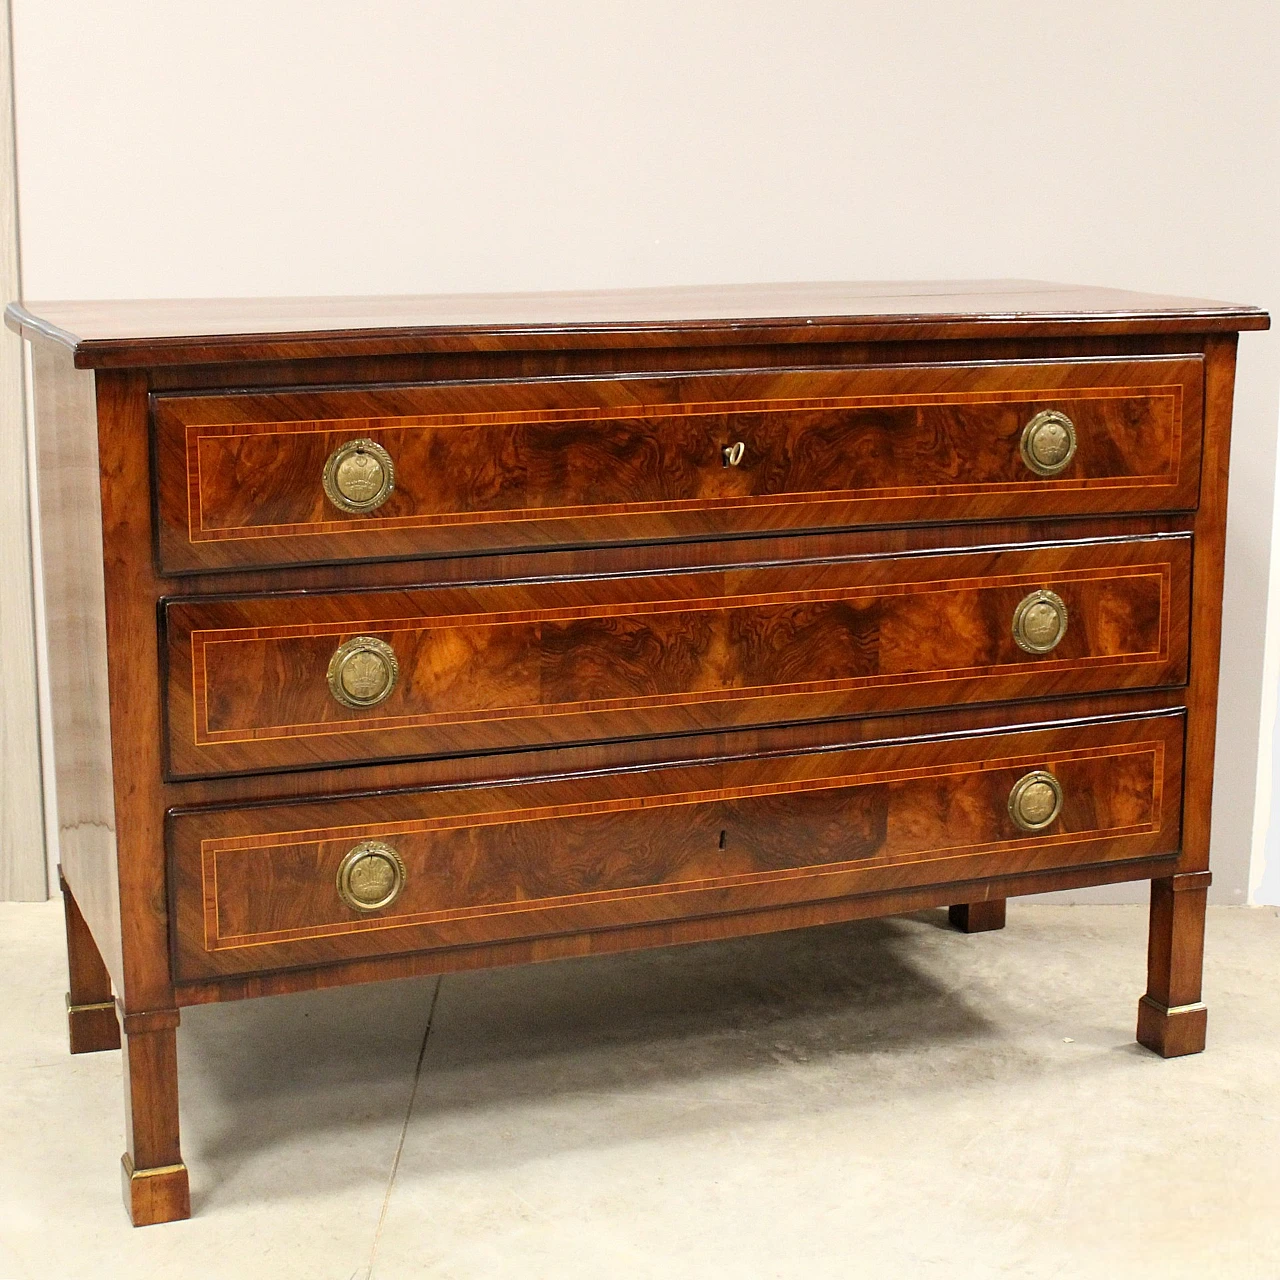 Bolognese Empire solid walnut commode, early 19th century 1